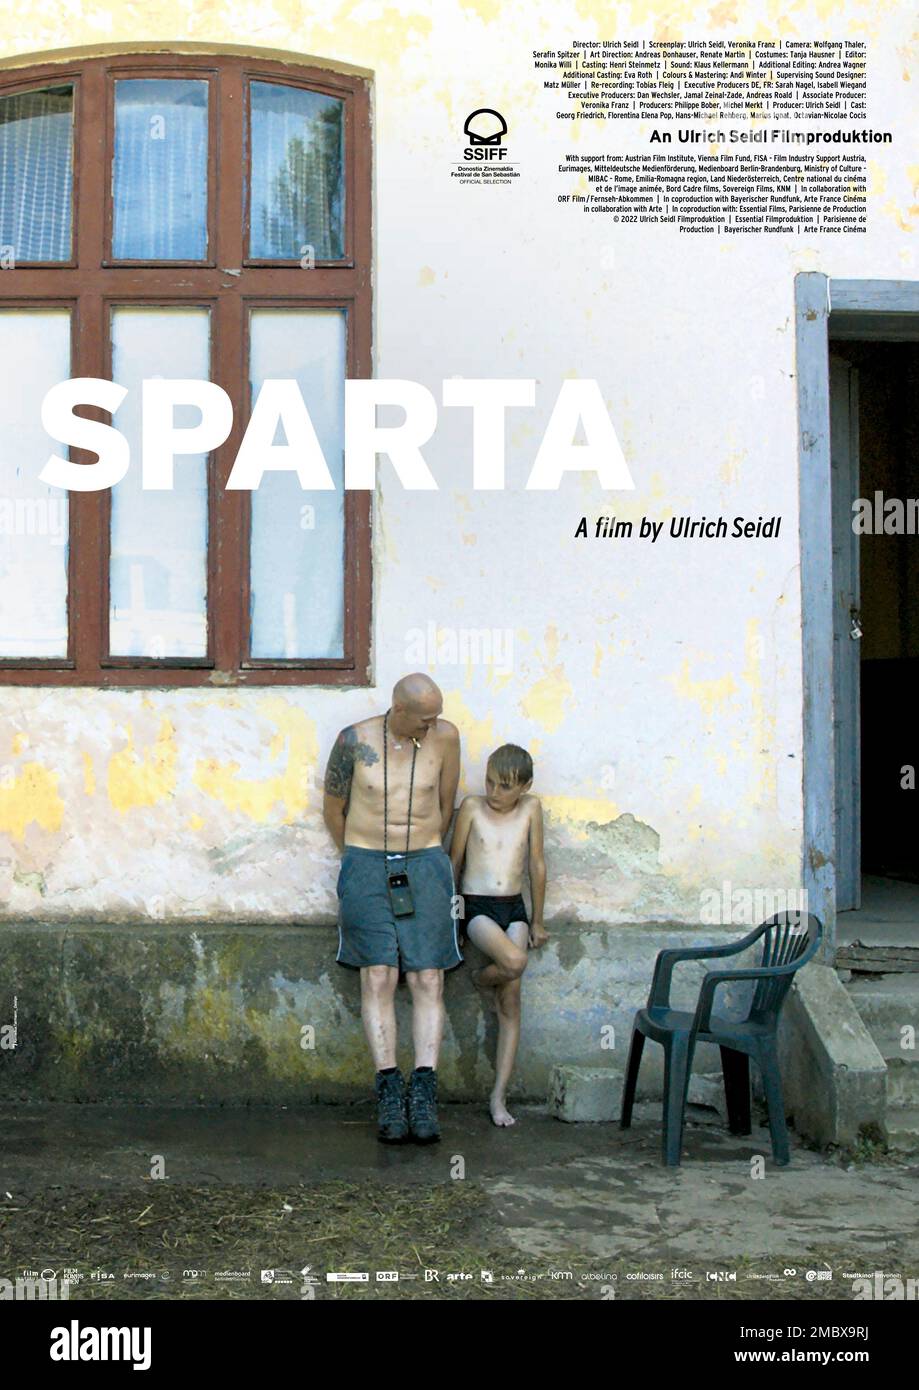 SPARTA (2022), directed by ULRICH SEIDL. Credit: ULRICH SEIDL FILM PRODUKTION GMBH / Album Stock Photo